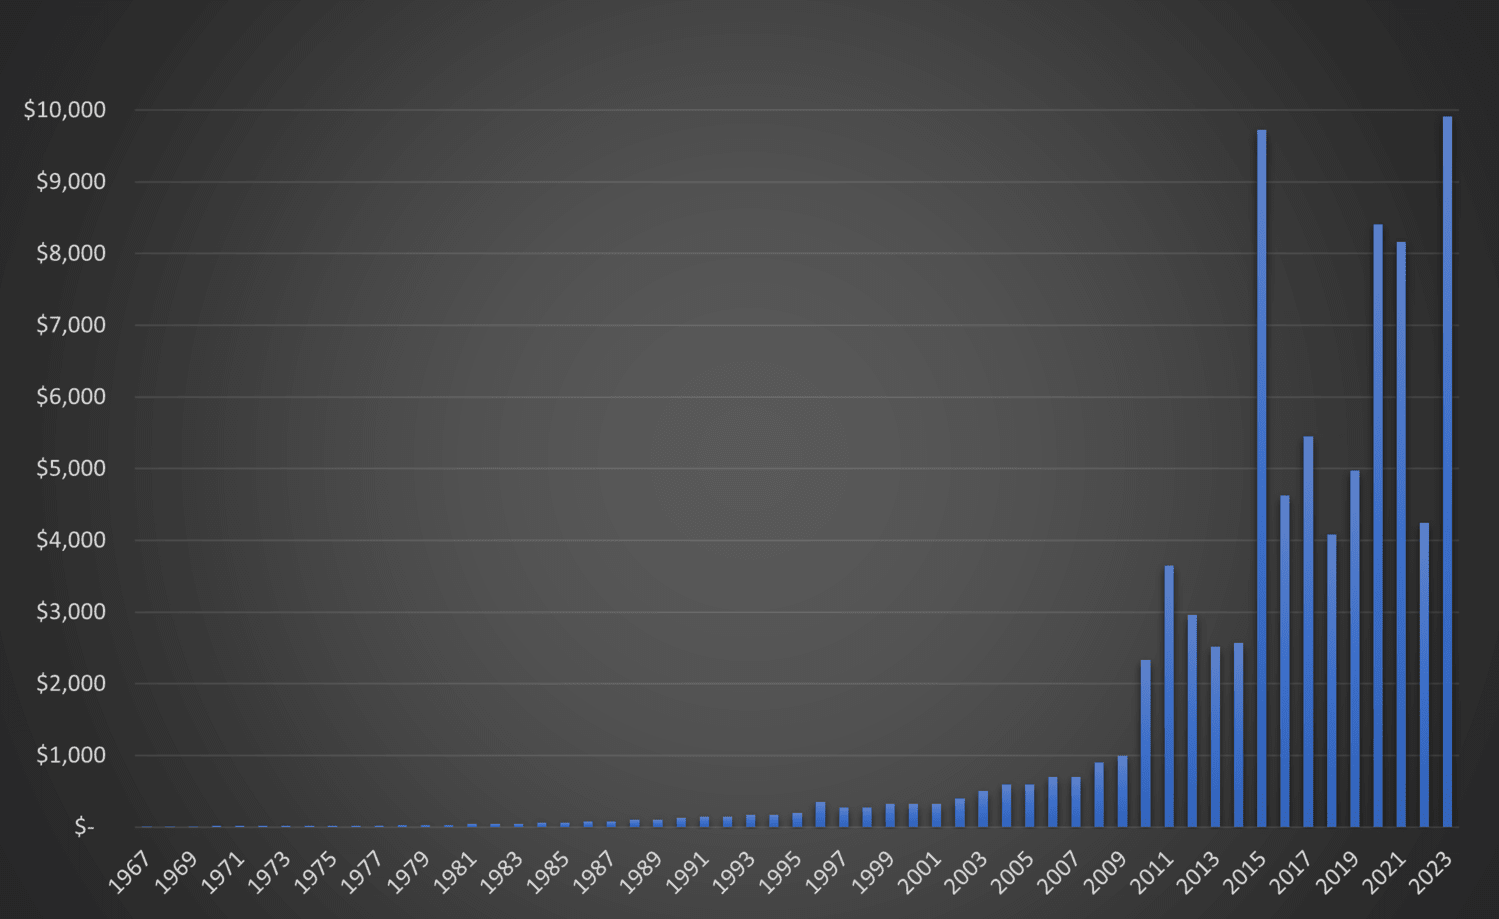 Casino.org graph showing average price of Super Bowl tickets since 1967